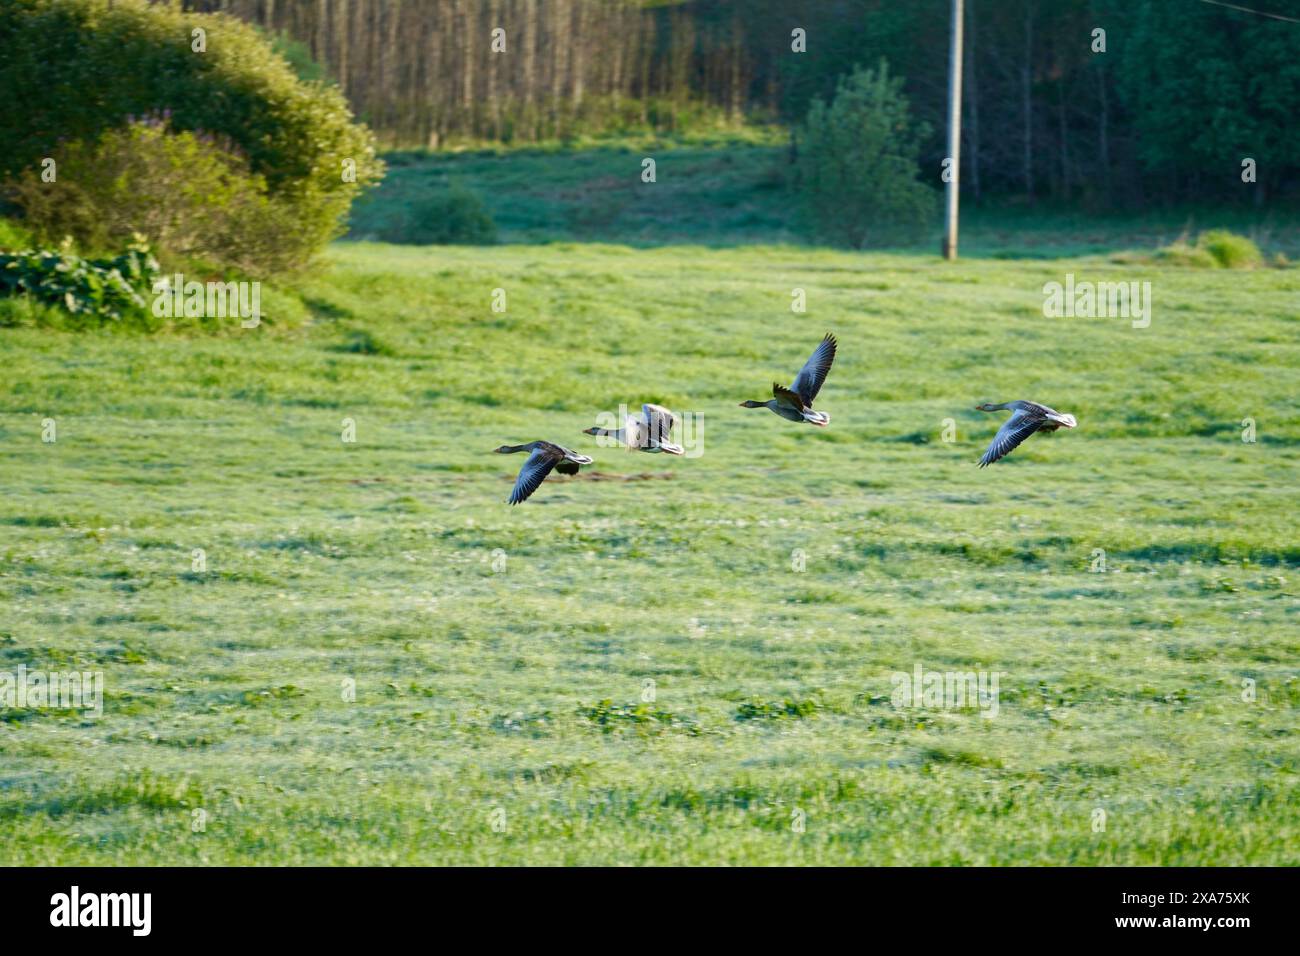 A flock of Anser anser, or grey geese, in flight over a green field near the village of Bud, Norway. Stock Photo